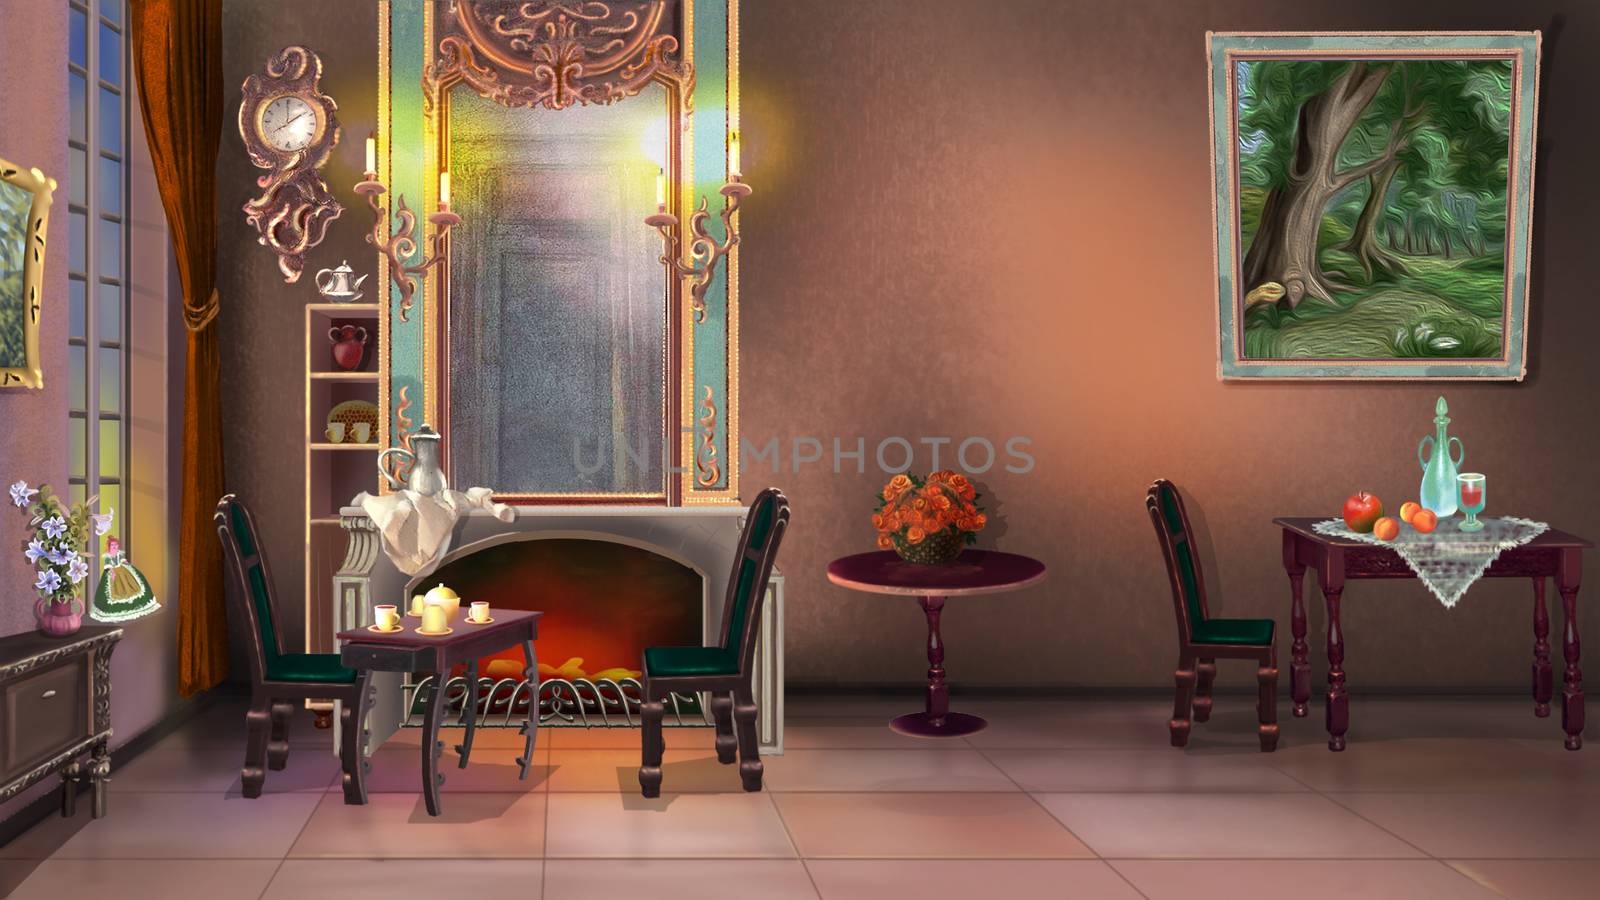 Digital Painting Background, Illustration of Vintage Home Interior in 19ht century style